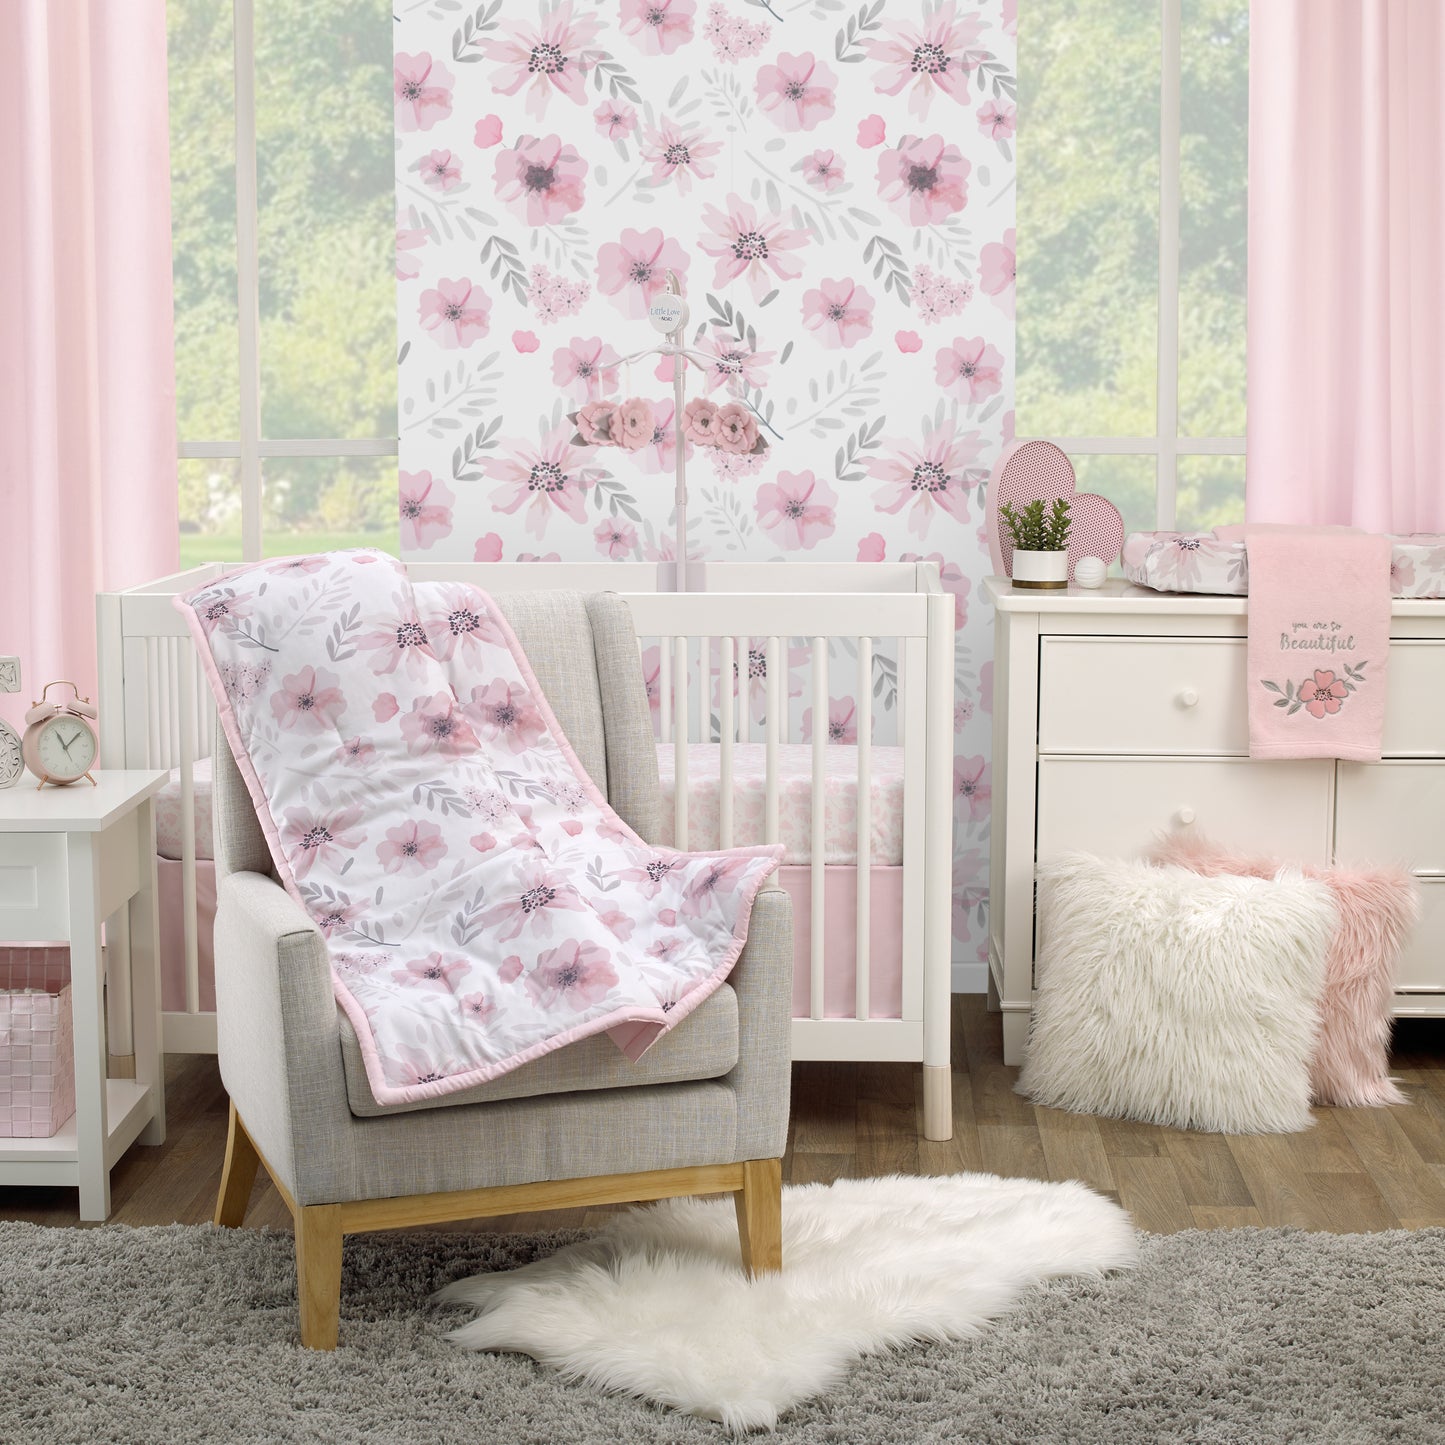 Little Love by NoJo Beautiful Blooms Pink, White, and Grey Floral 3 Piece Nursery Crib Bedding Set - Comforter, Fitted Crib Sheet and Crib Skirt